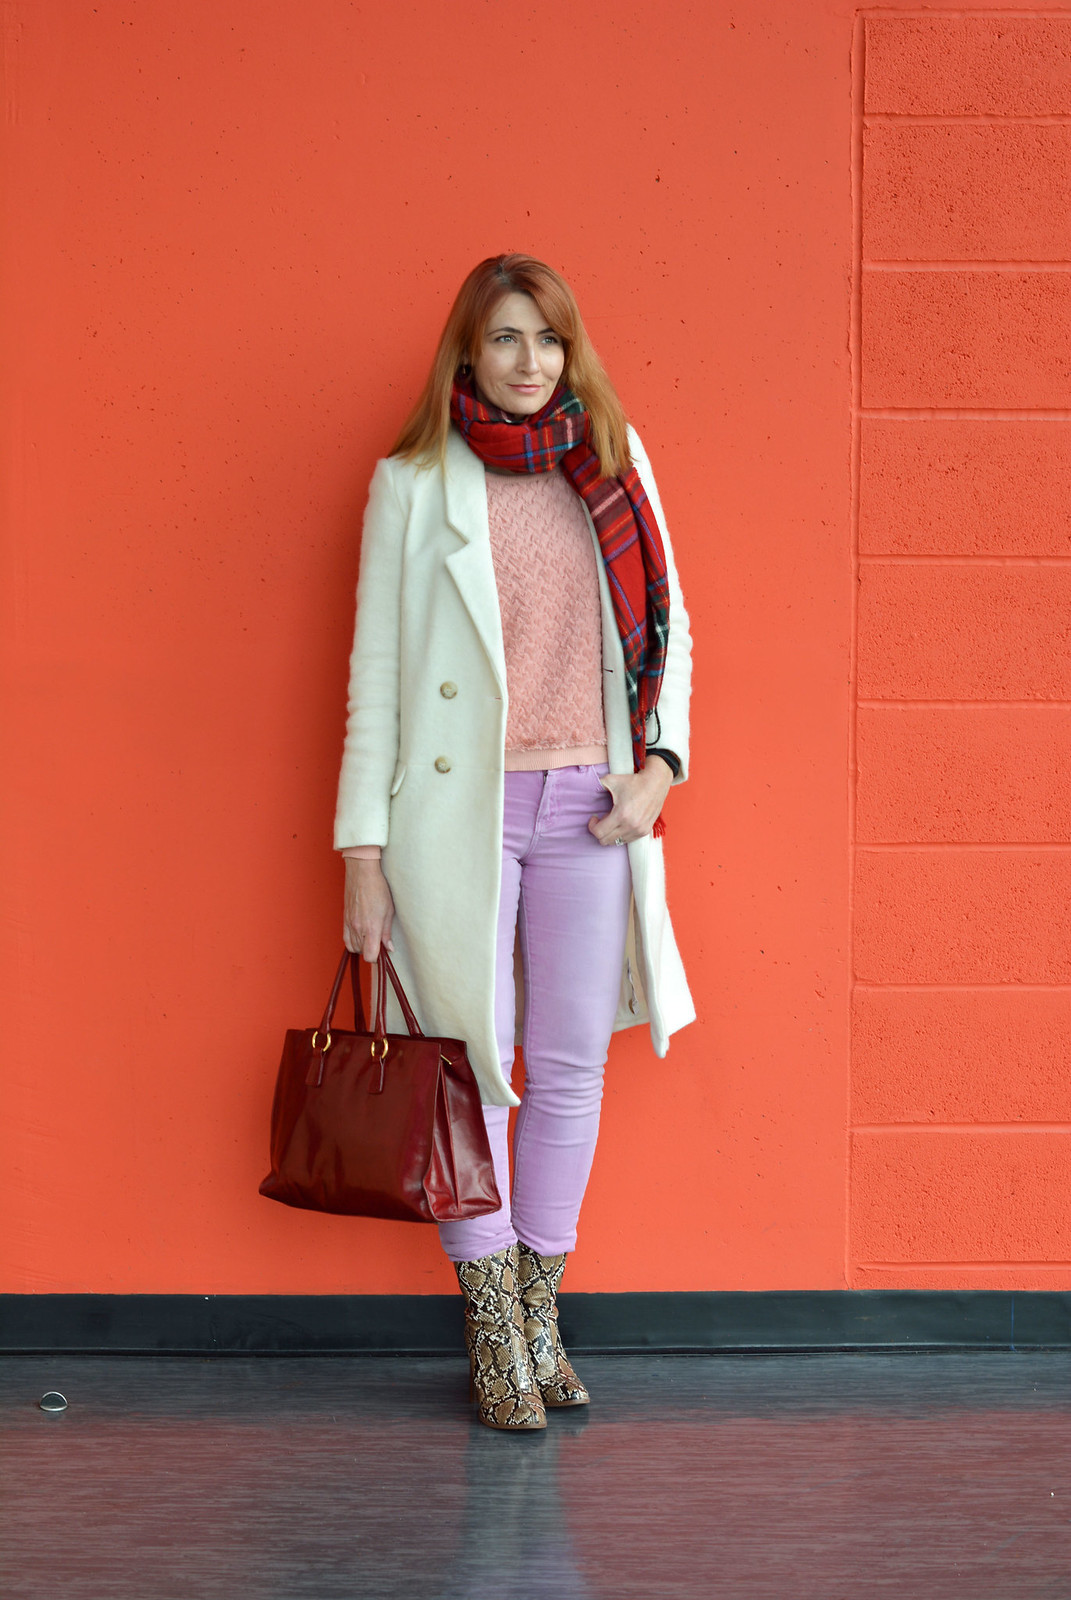 Winter brights of red, pink, lilac and white | Not Dressed As Lamb